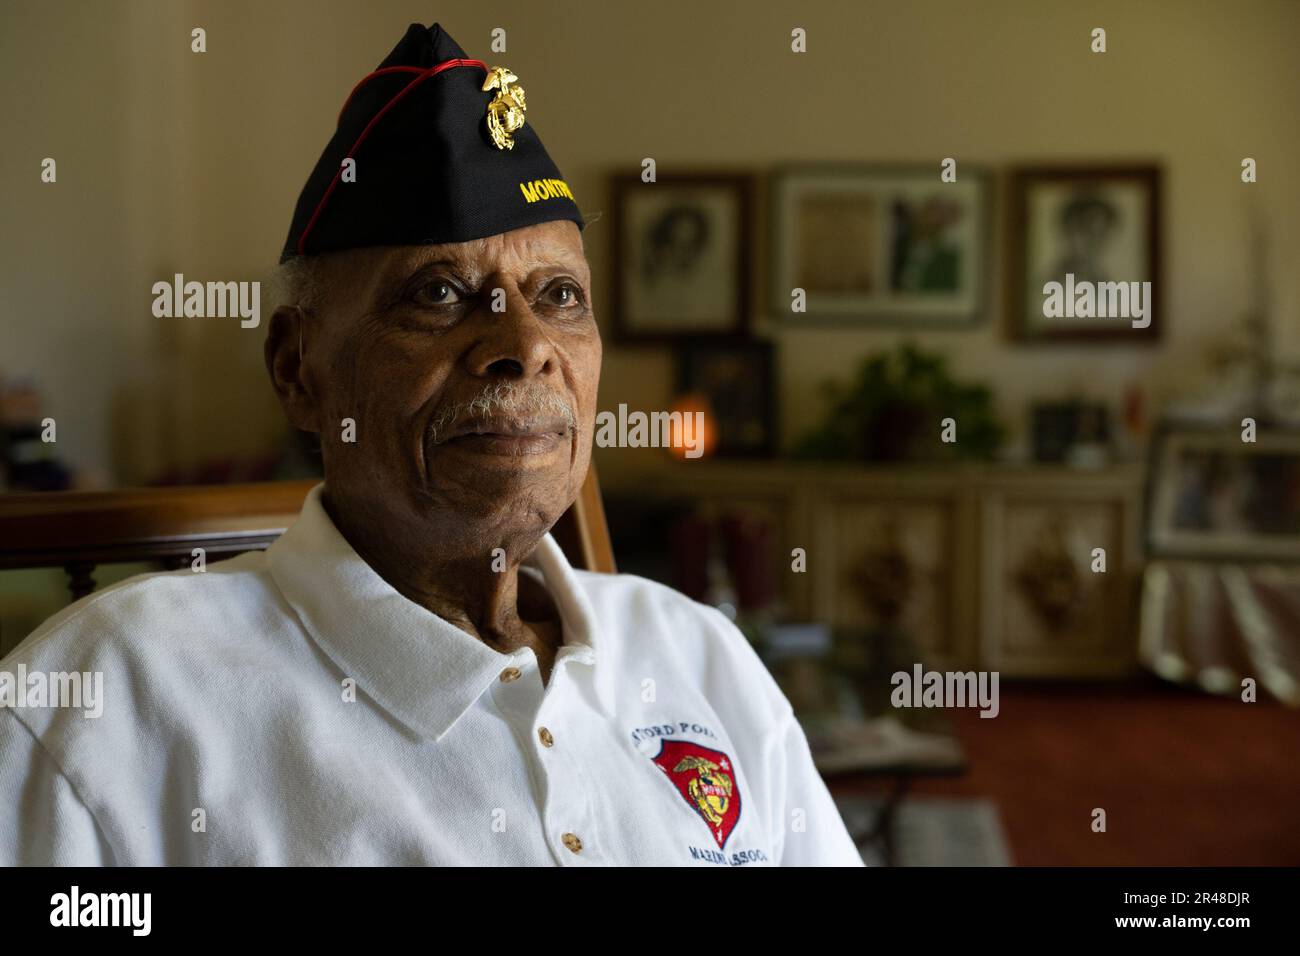 May 24, 2023, Sacramento, CA, USA: Rich Davis, 97, is one of the last surviving Montford Point Marines, a Black World War II unit, and lives in Sacramento, Wednesday, May 24, 2023. The first African-American recruits in the Marine Corps trained at Montford Point, eventually ending the military's longstanding policy of racial segregation.They are the first African-Americans to enlist in the U.S. Marine Corps after President Franklin Roosevelt issues an Executive Order establishing the Fair Employment Practices Commission in June 1941. The recruits trained at Camp Montford Point in Jacksonvill Stock Photo